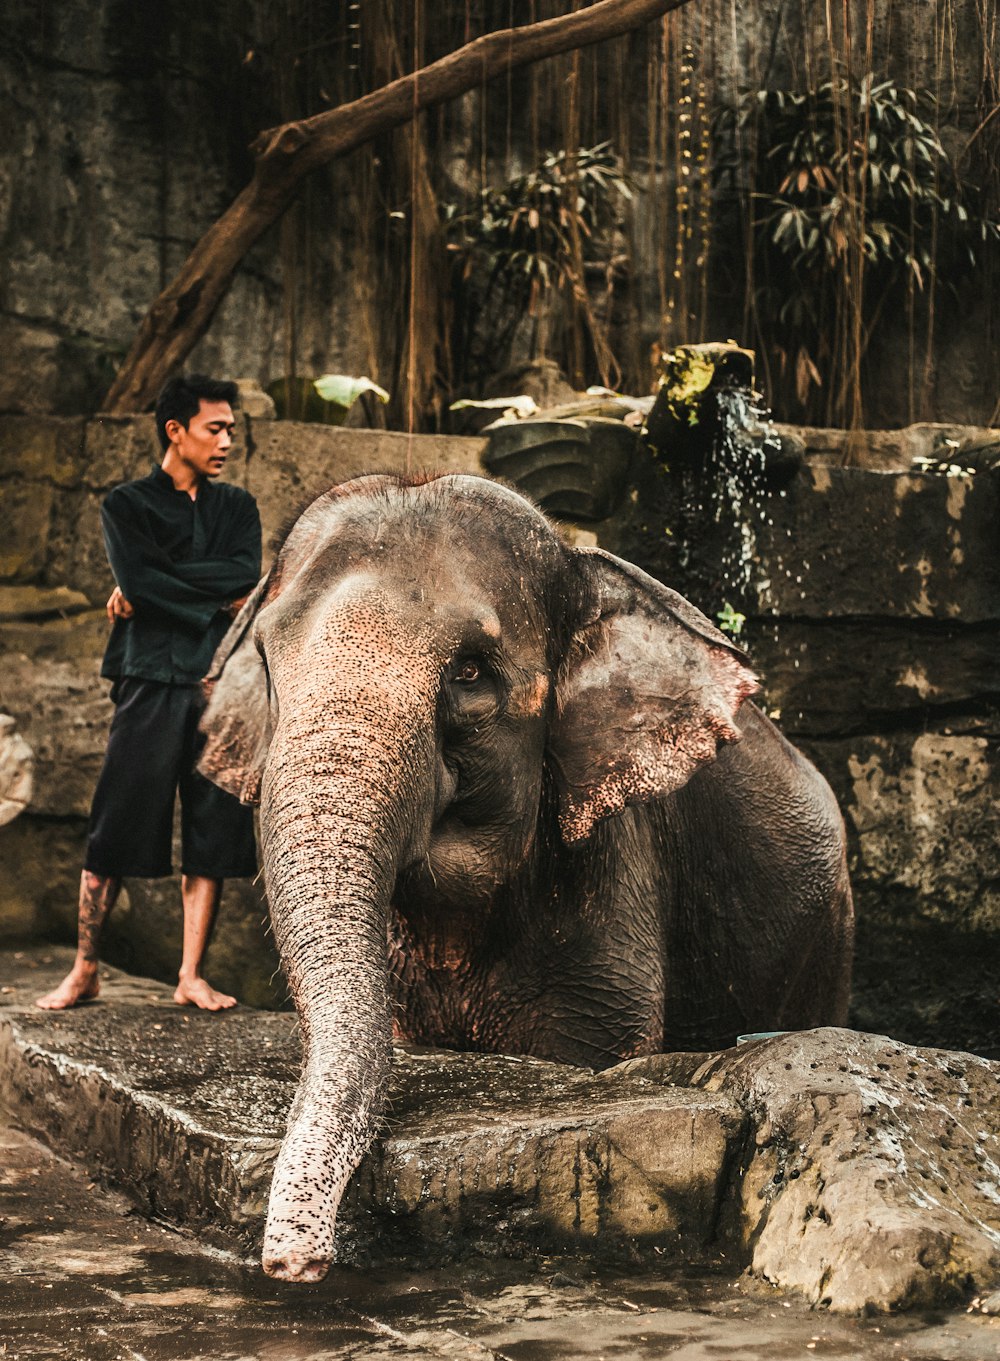 woman in black jacket standing beside elephant during daytime